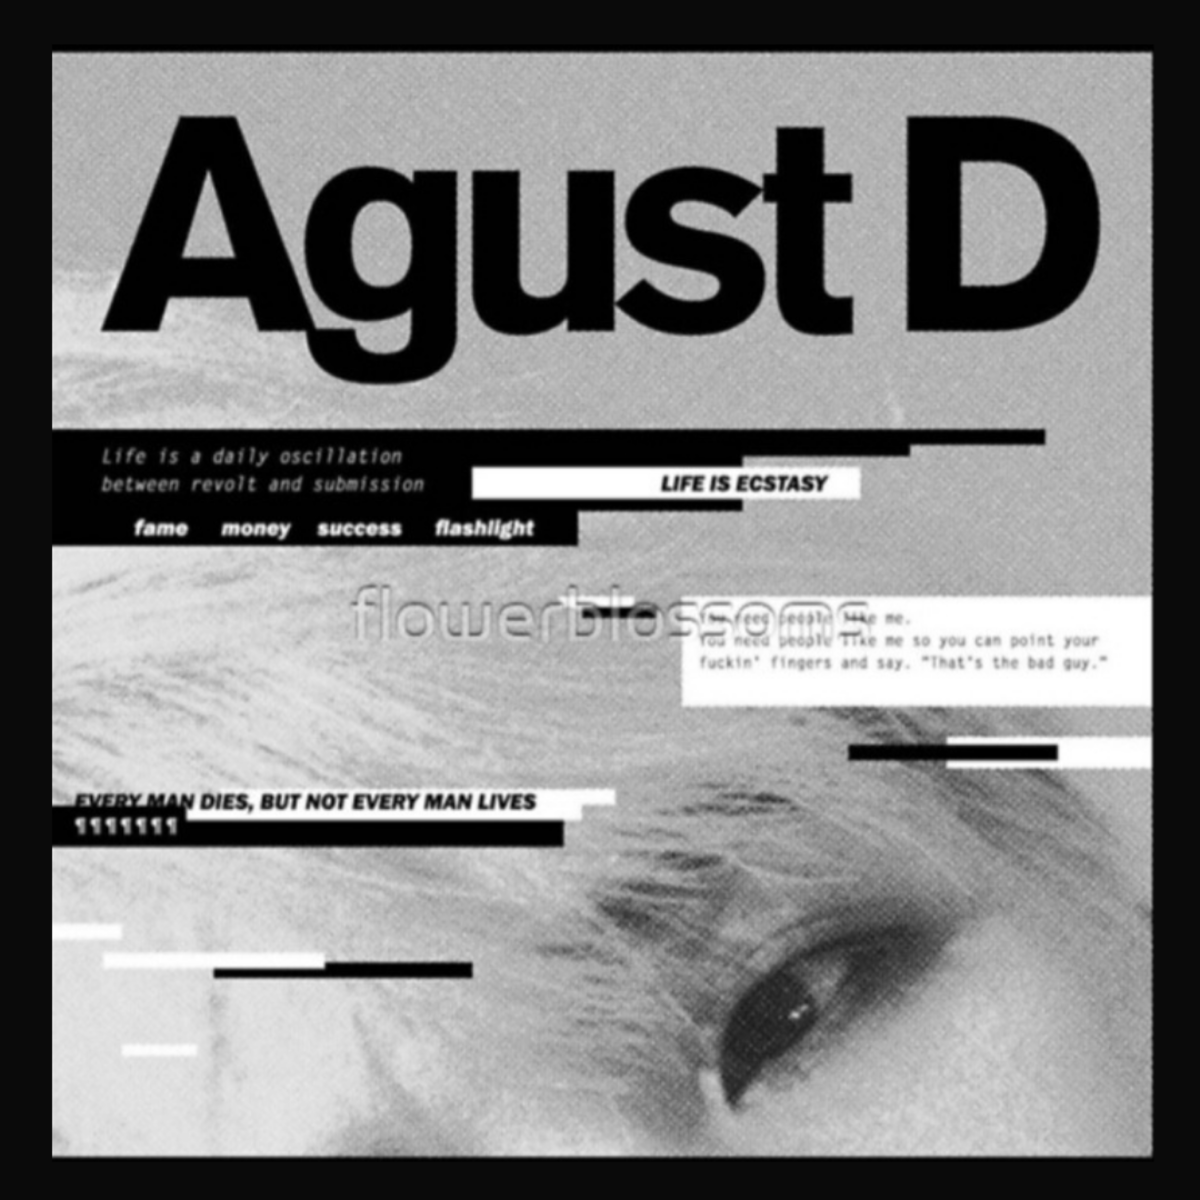 Agust D is the debut mixtape by South Korean rapper Agust D, better known as Suga of BTS.